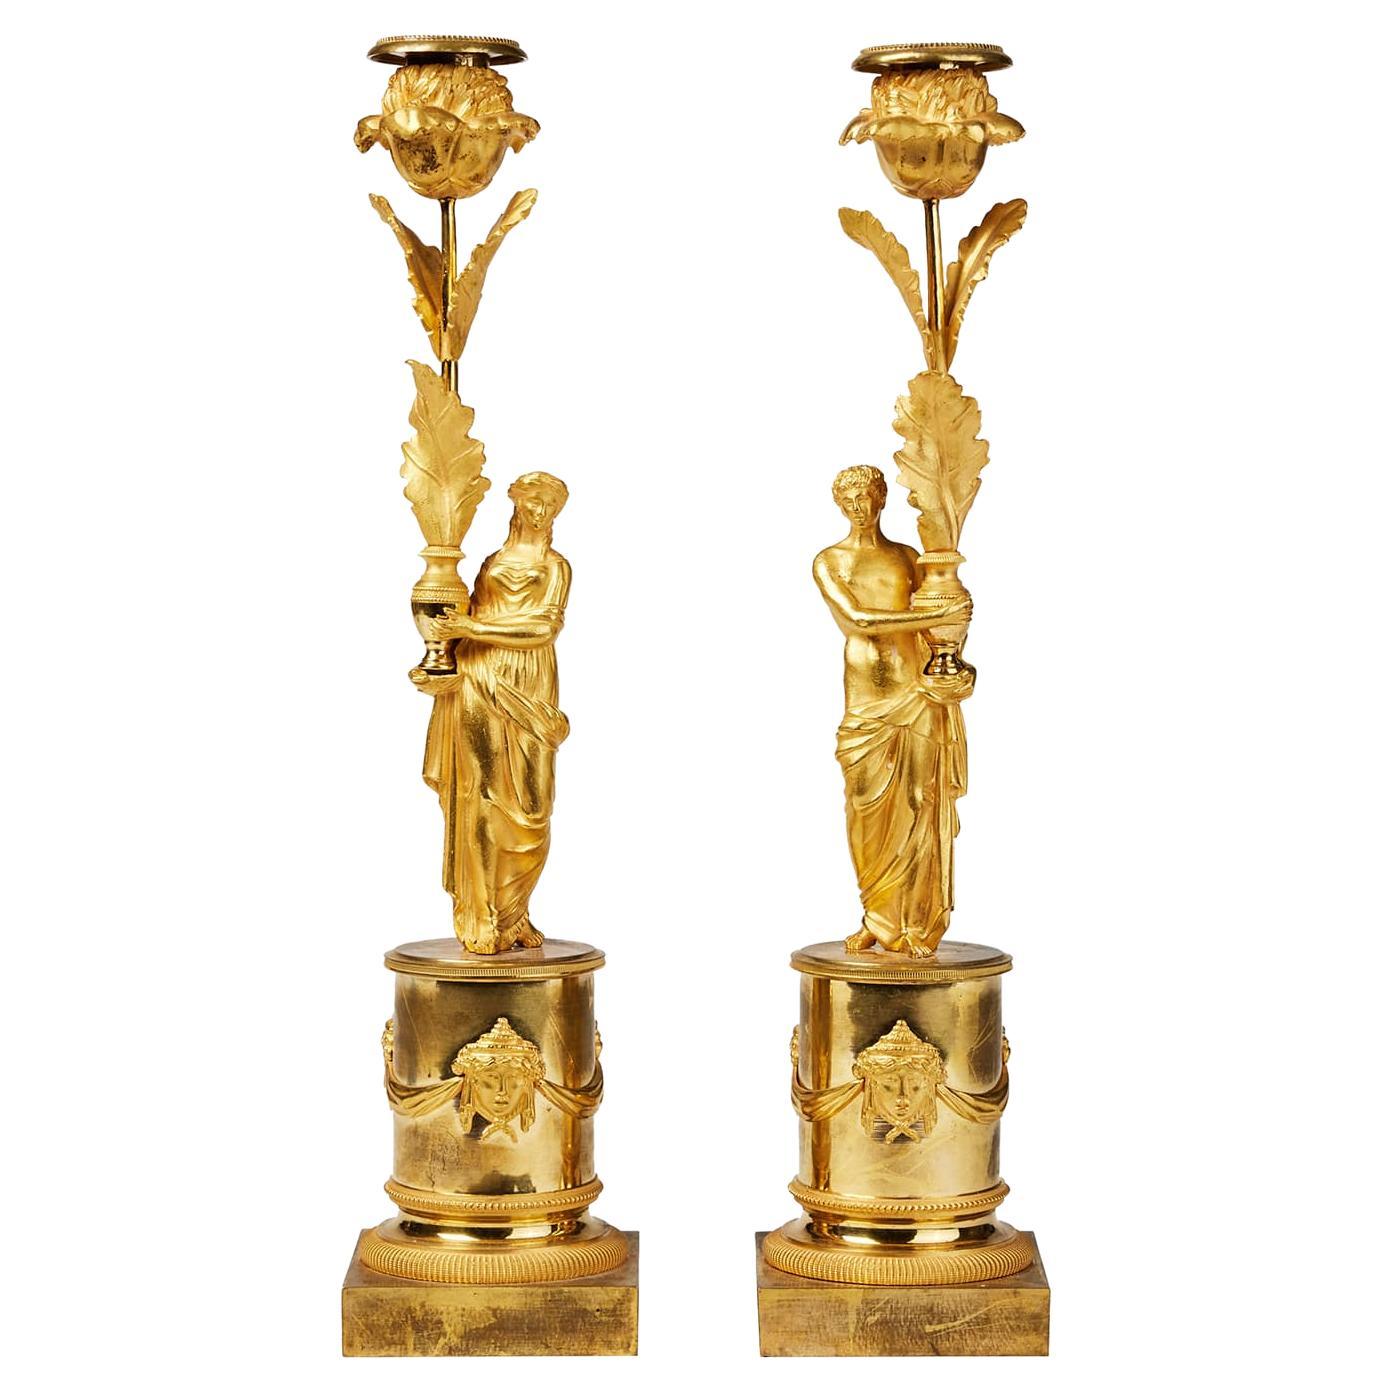 18th-19th Century French Empire Pair of Antique Gilded Bronze Candle Holders